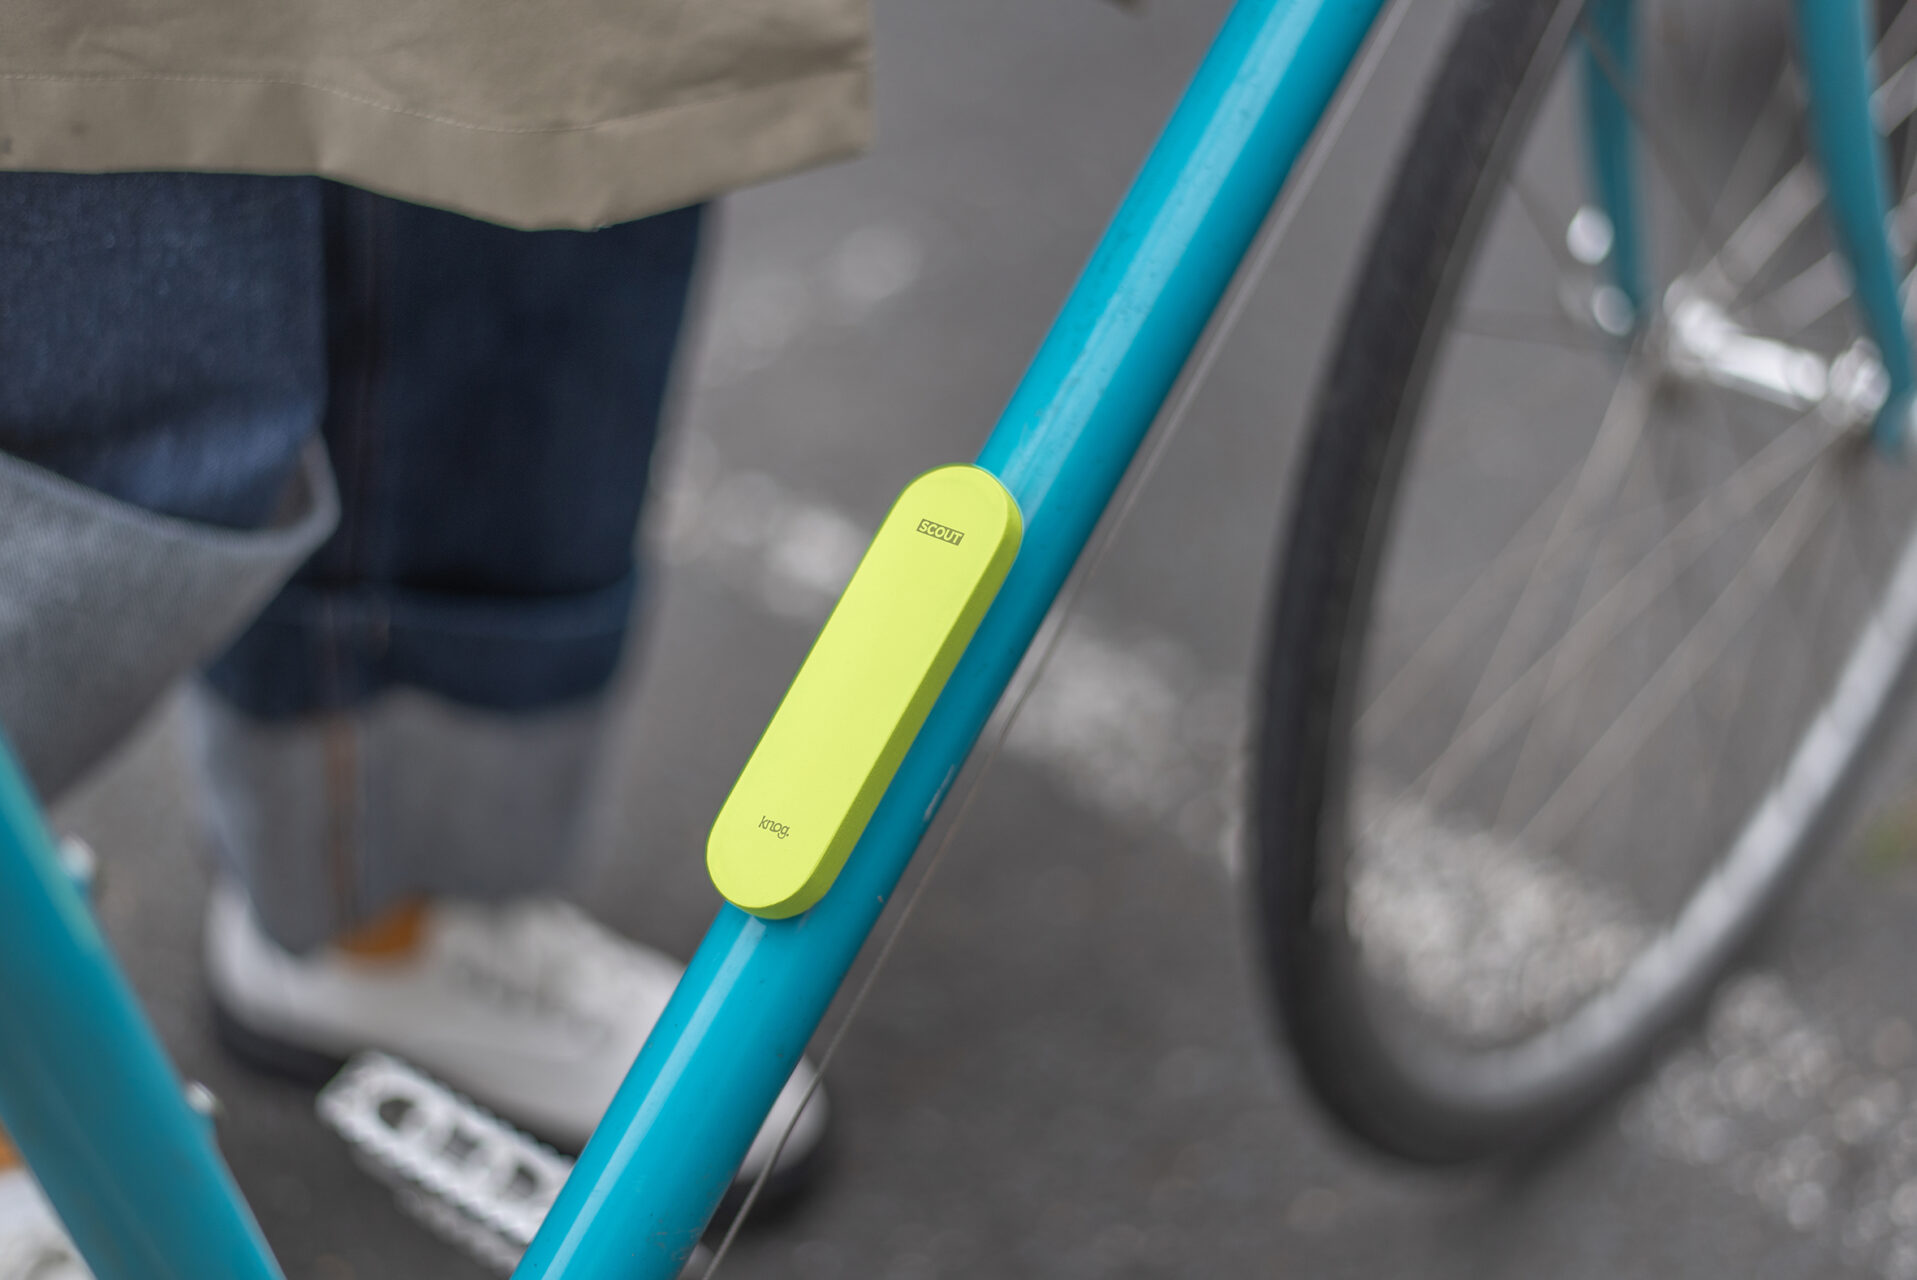 scout bike alarm and finder